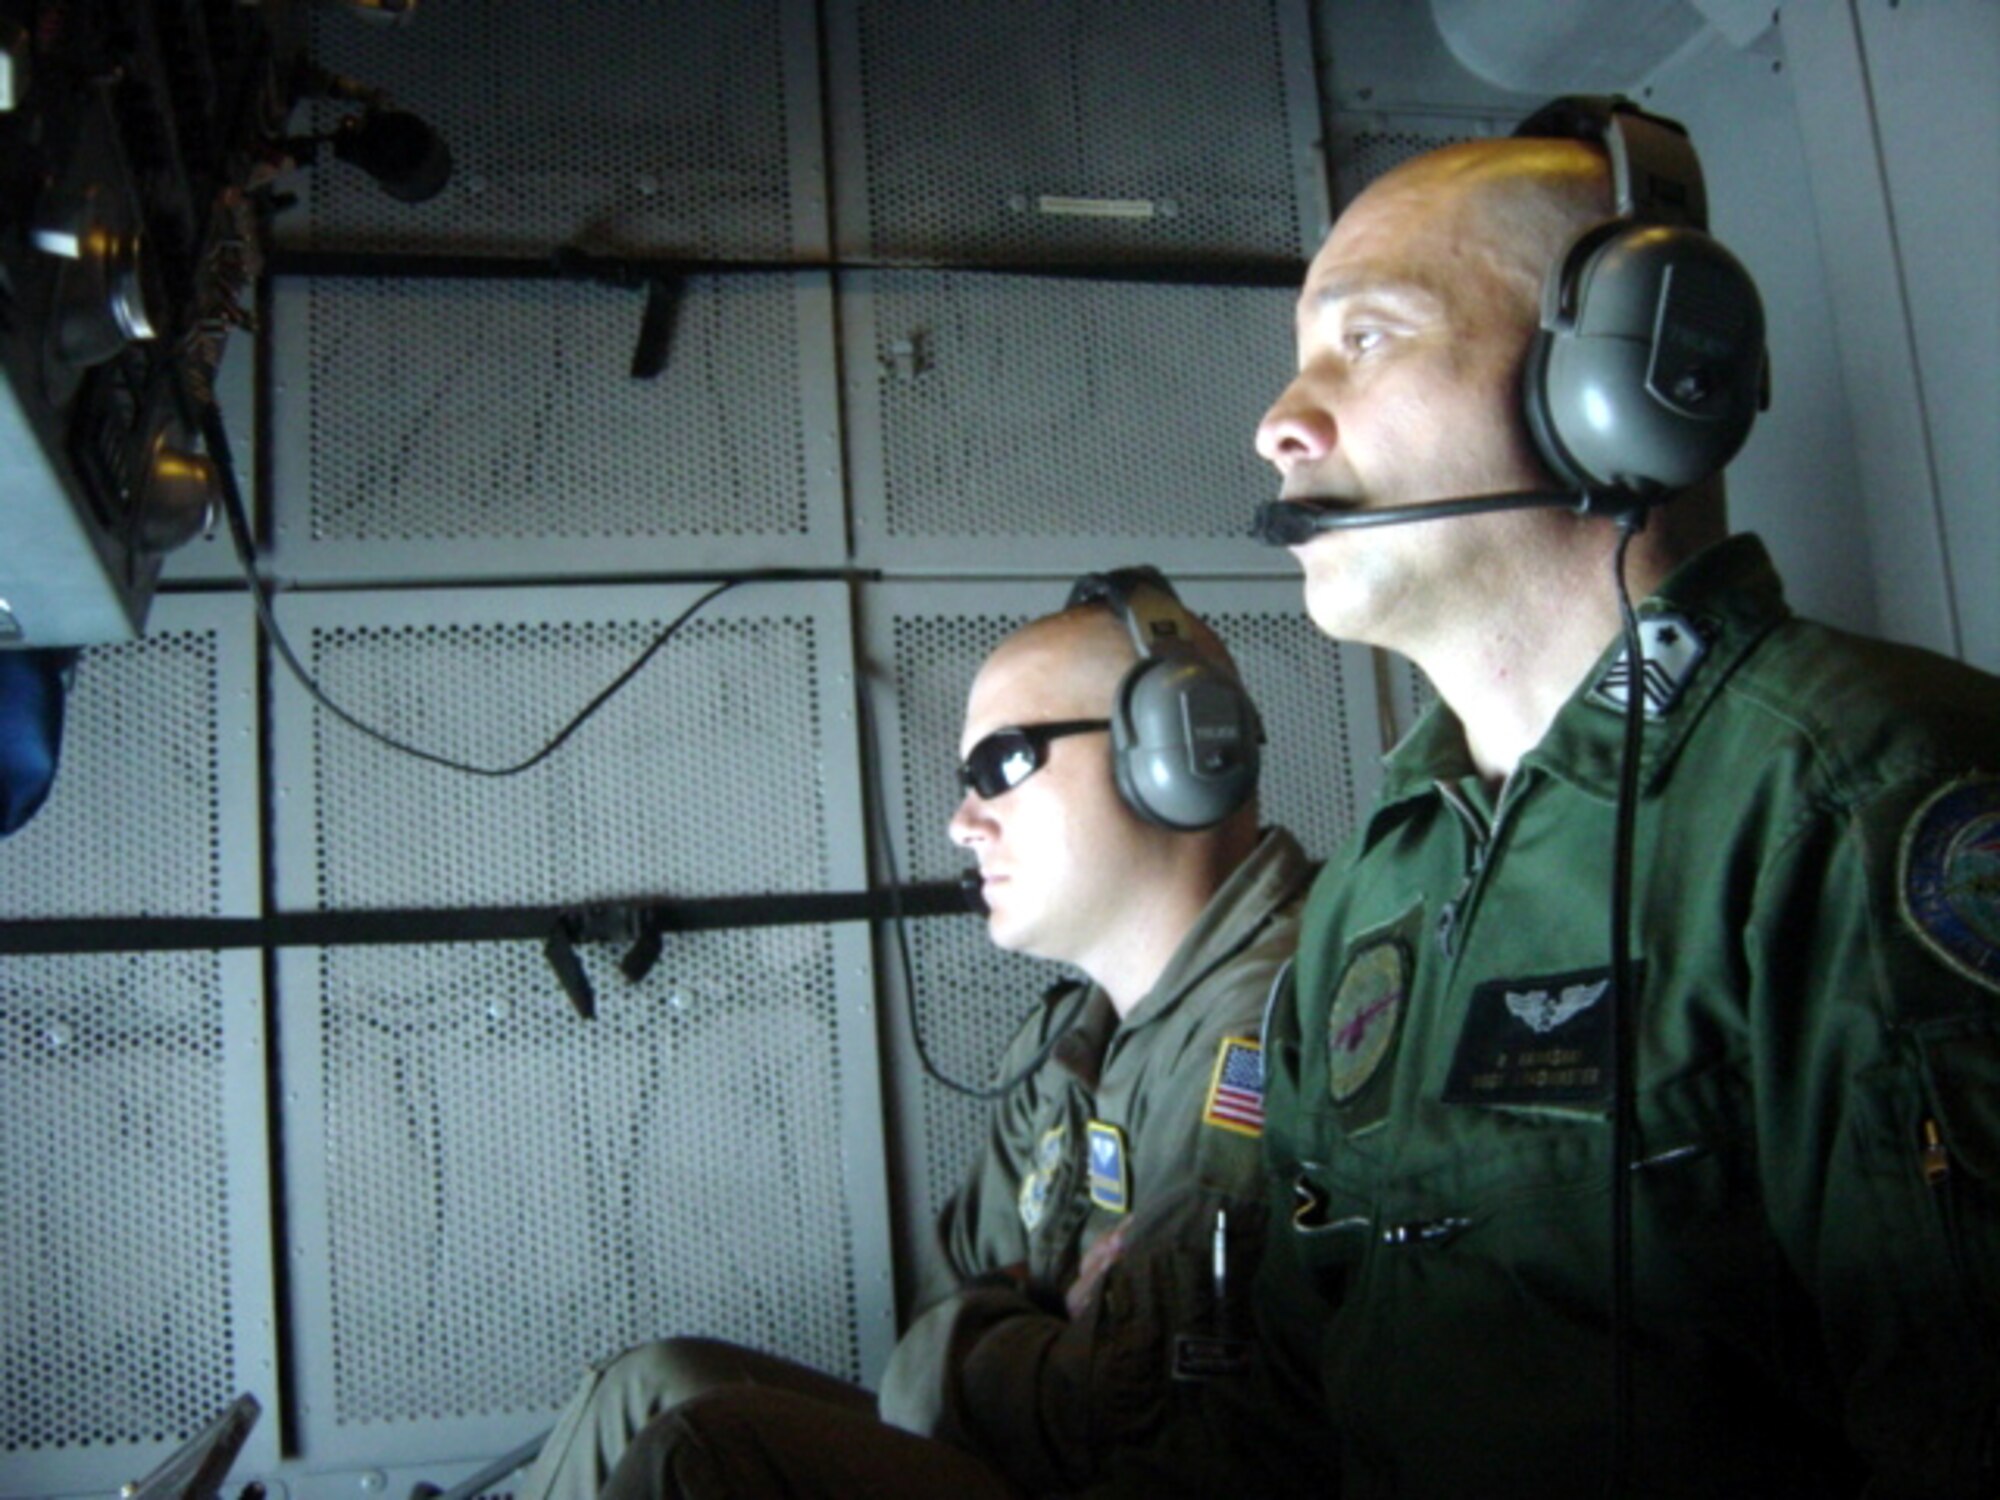 Staff Sgt. Zach Fleming [left], 6th Aerial Refueling Squadron instructor, watches as Master Sgt. Randy Kawasaki, Japan Air Self Defense Force, attempts aerial  refueling contact during a KC-10 training mission. (U.S. Air Force photo)